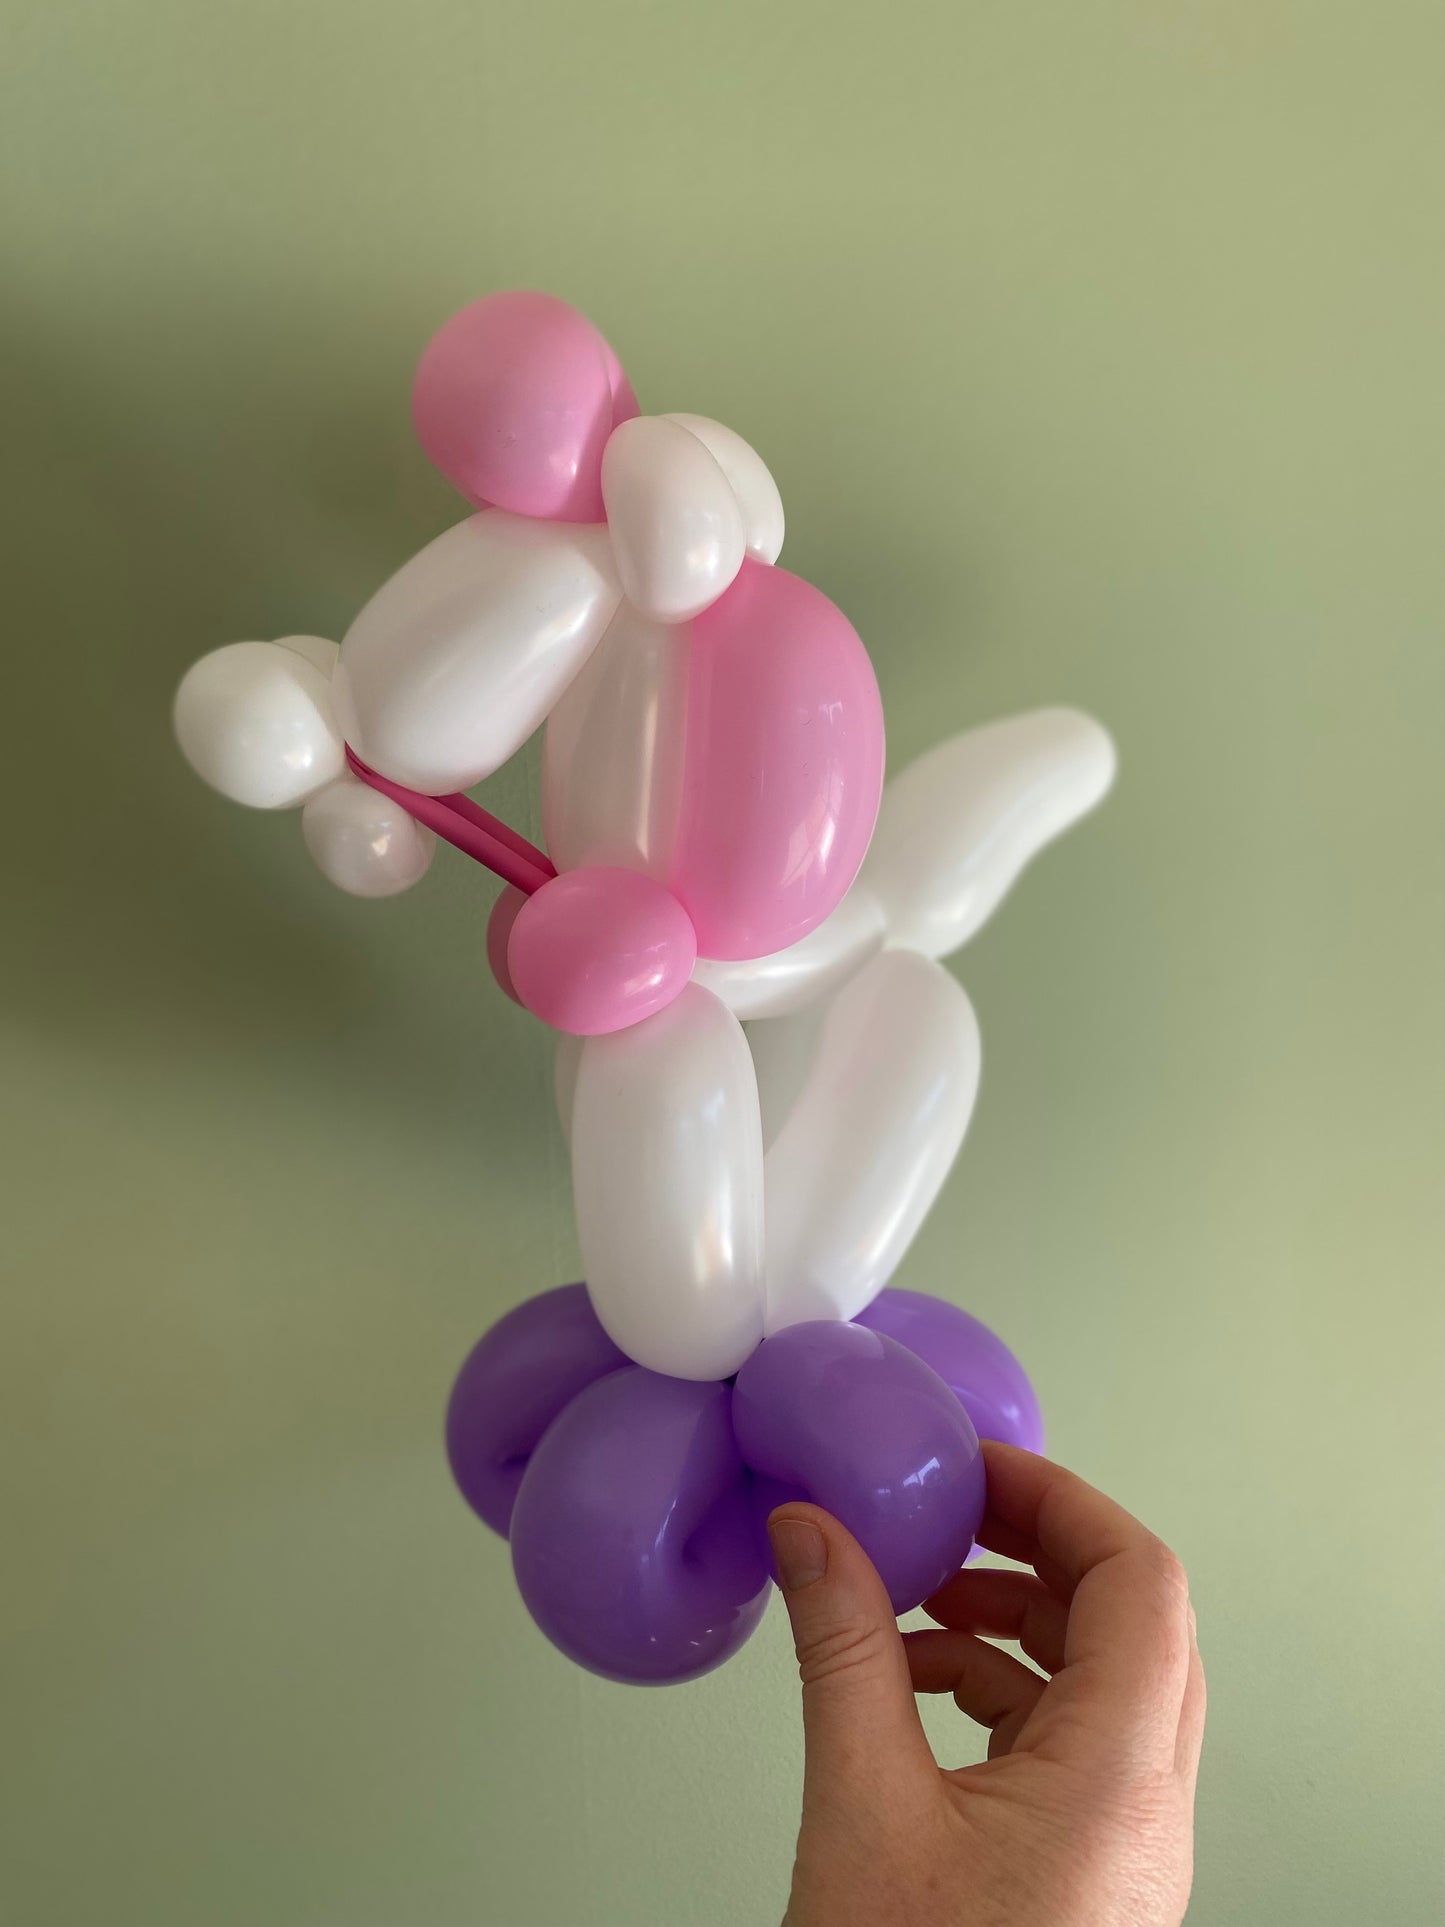 2 hours of balloon twisting - private parties / kids birthdays